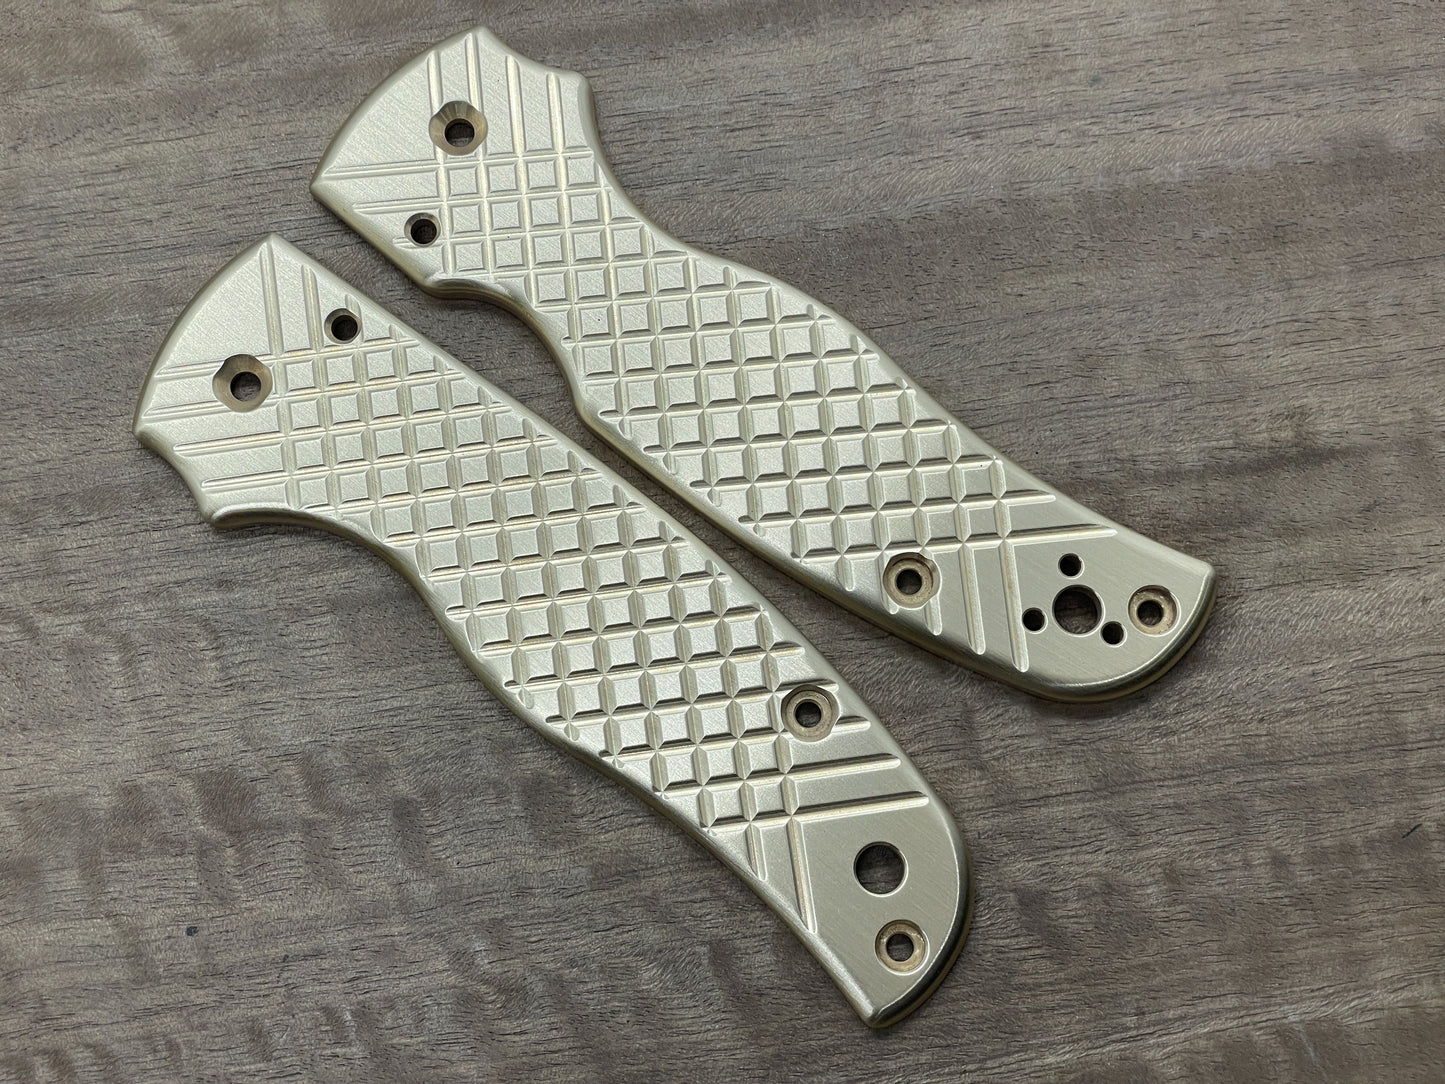 FRAG milled Brushed Brass Scales for SHAMAN Spyderco